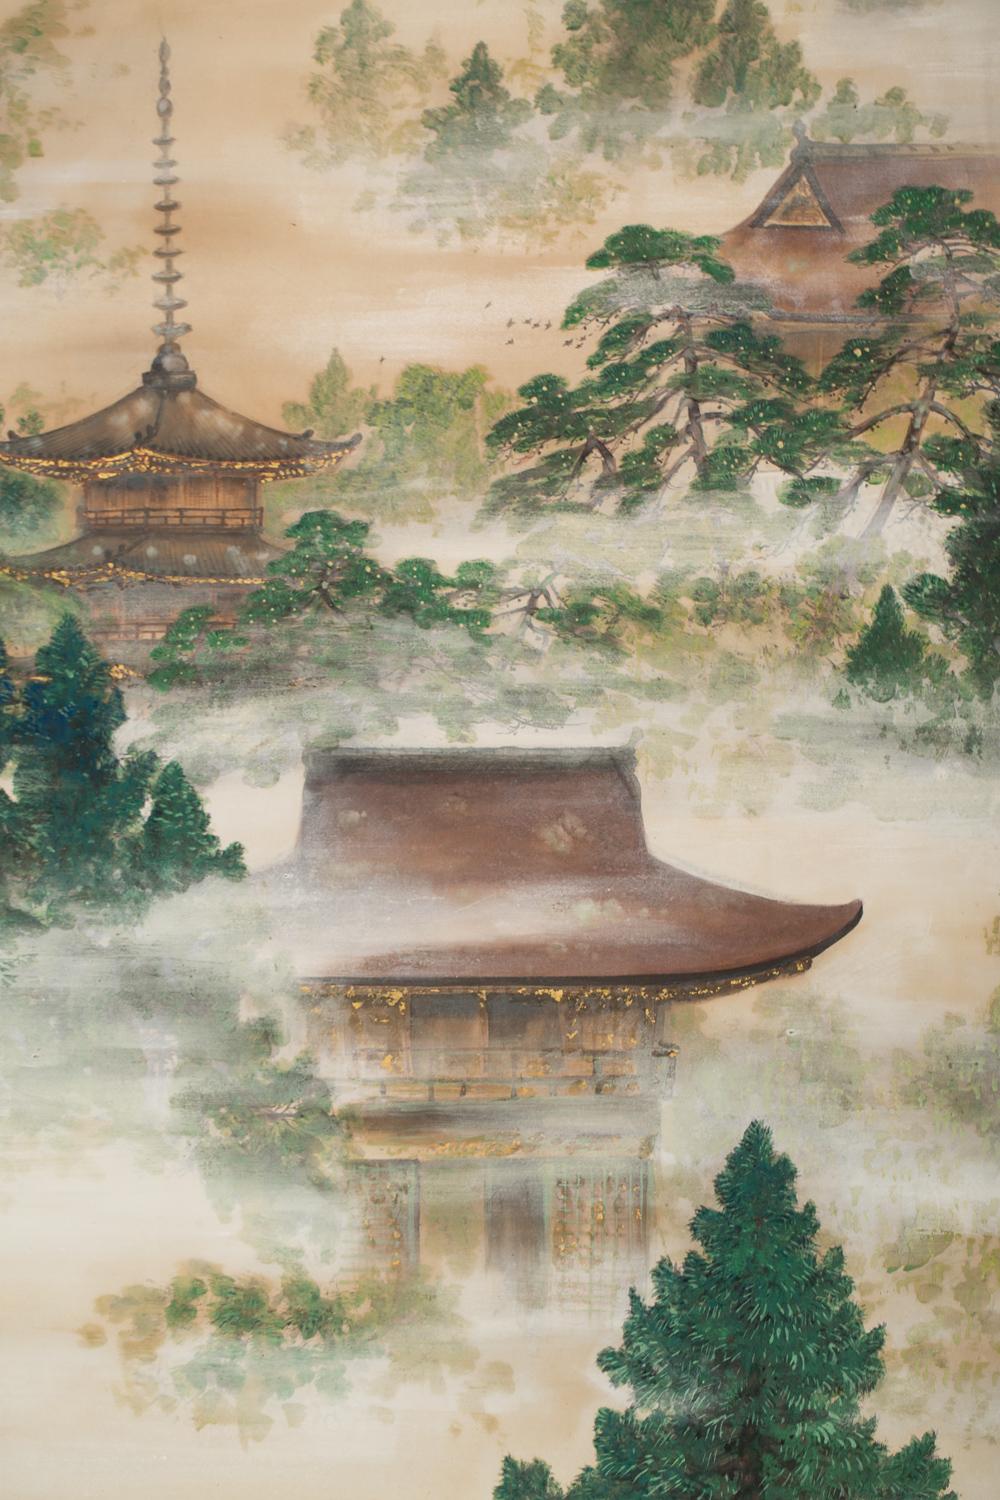 Kyoto landscape featuring Kyomizu Shrine in all its glory in the Higashiyama Hills.
Artist signature and seal read: Asami Kojo
Mineral pigments on mulberry paper with mica dust mist.